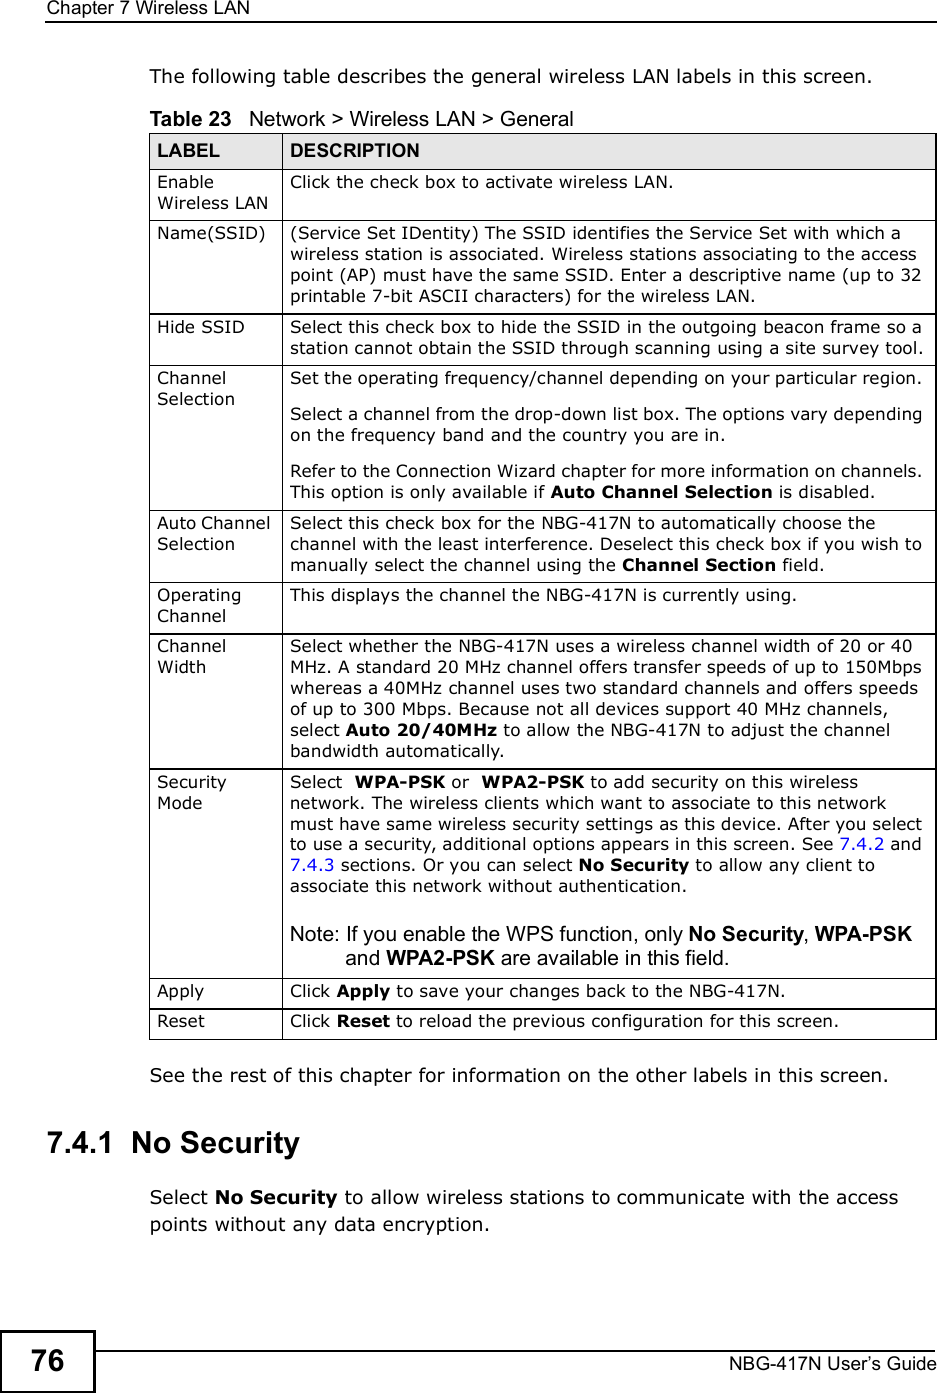 Chapter 7Wireless LANNBG-417N User s Guide76The following table describes the general wireless LAN labels in this screen.See the rest of this chapter for information on the other labels in this screen. 7.4.1  No SecuritySelect No Security to allow wireless stations to communicate with the access points without any data encryption. Table 23   Network &gt; Wireless LAN &gt; GeneralLABEL DESCRIPTIONEnable Wireless LANClick the check box to activate wireless LAN.Name(SSID) (Service Set IDentity) The SSID identifies the Service Set with which a wireless station is associated. Wireless stations associating to the access point (AP) must have the same SSID. Enter a descriptive name (up to 32 printable 7-bit ASCII characters) for the wireless LAN. Hide SSID Select this check box to hide the SSID in the outgoing beacon frame so a station cannot obtain the SSID through scanning using a site survey tool.Channel SelectionSet the operating frequency/channel depending on your particular region. Select a channel from the drop-down list box. The options vary depending on the frequency band and the country you are in.Refer to the Connection Wizard chapter for more information on channels. This option is only available if Auto Channel Selection is disabled.Auto Channel SelectionSelect this check box for the NBG-417N to automatically choose the channel with the least interference. Deselect this check box if you wish to manually select the channel using the Channel Section field.Operating Channel This displays the channel the NBG-417N is currently using.Channel WidthSelect whether the NBG-417N uses a wireless channel width of 20 or 40 MHz. A standard 20 MHz channel offers transfer speeds of up to 150Mbps whereas a 40MHz channel uses two standard channels and offers speeds of up to 300 Mbps. Because not all devices support 40 MHz channels, select Auto 20/40MHz to allow the NBG-417N to adjust the channel bandwidth automatically.Security ModeSelect  WPA-PSK or  WPA2-PSK to add security on this wireless network. The wireless clients which want to associate to this network must have same wireless security settings as this device. After you select to use a security, additional options appears in this screen. See 7.4.2 and 7.4.3 sections. Or you can select No Security to allow any client to associate this network without authentication.Note: If you enable the WPS function, only No Security, WPA-PSK and WPA2-PSK are available in this field.Apply Click Apply to save your changes back to the NBG-417N.Reset Click Reset to reload the previous configuration for this screen.